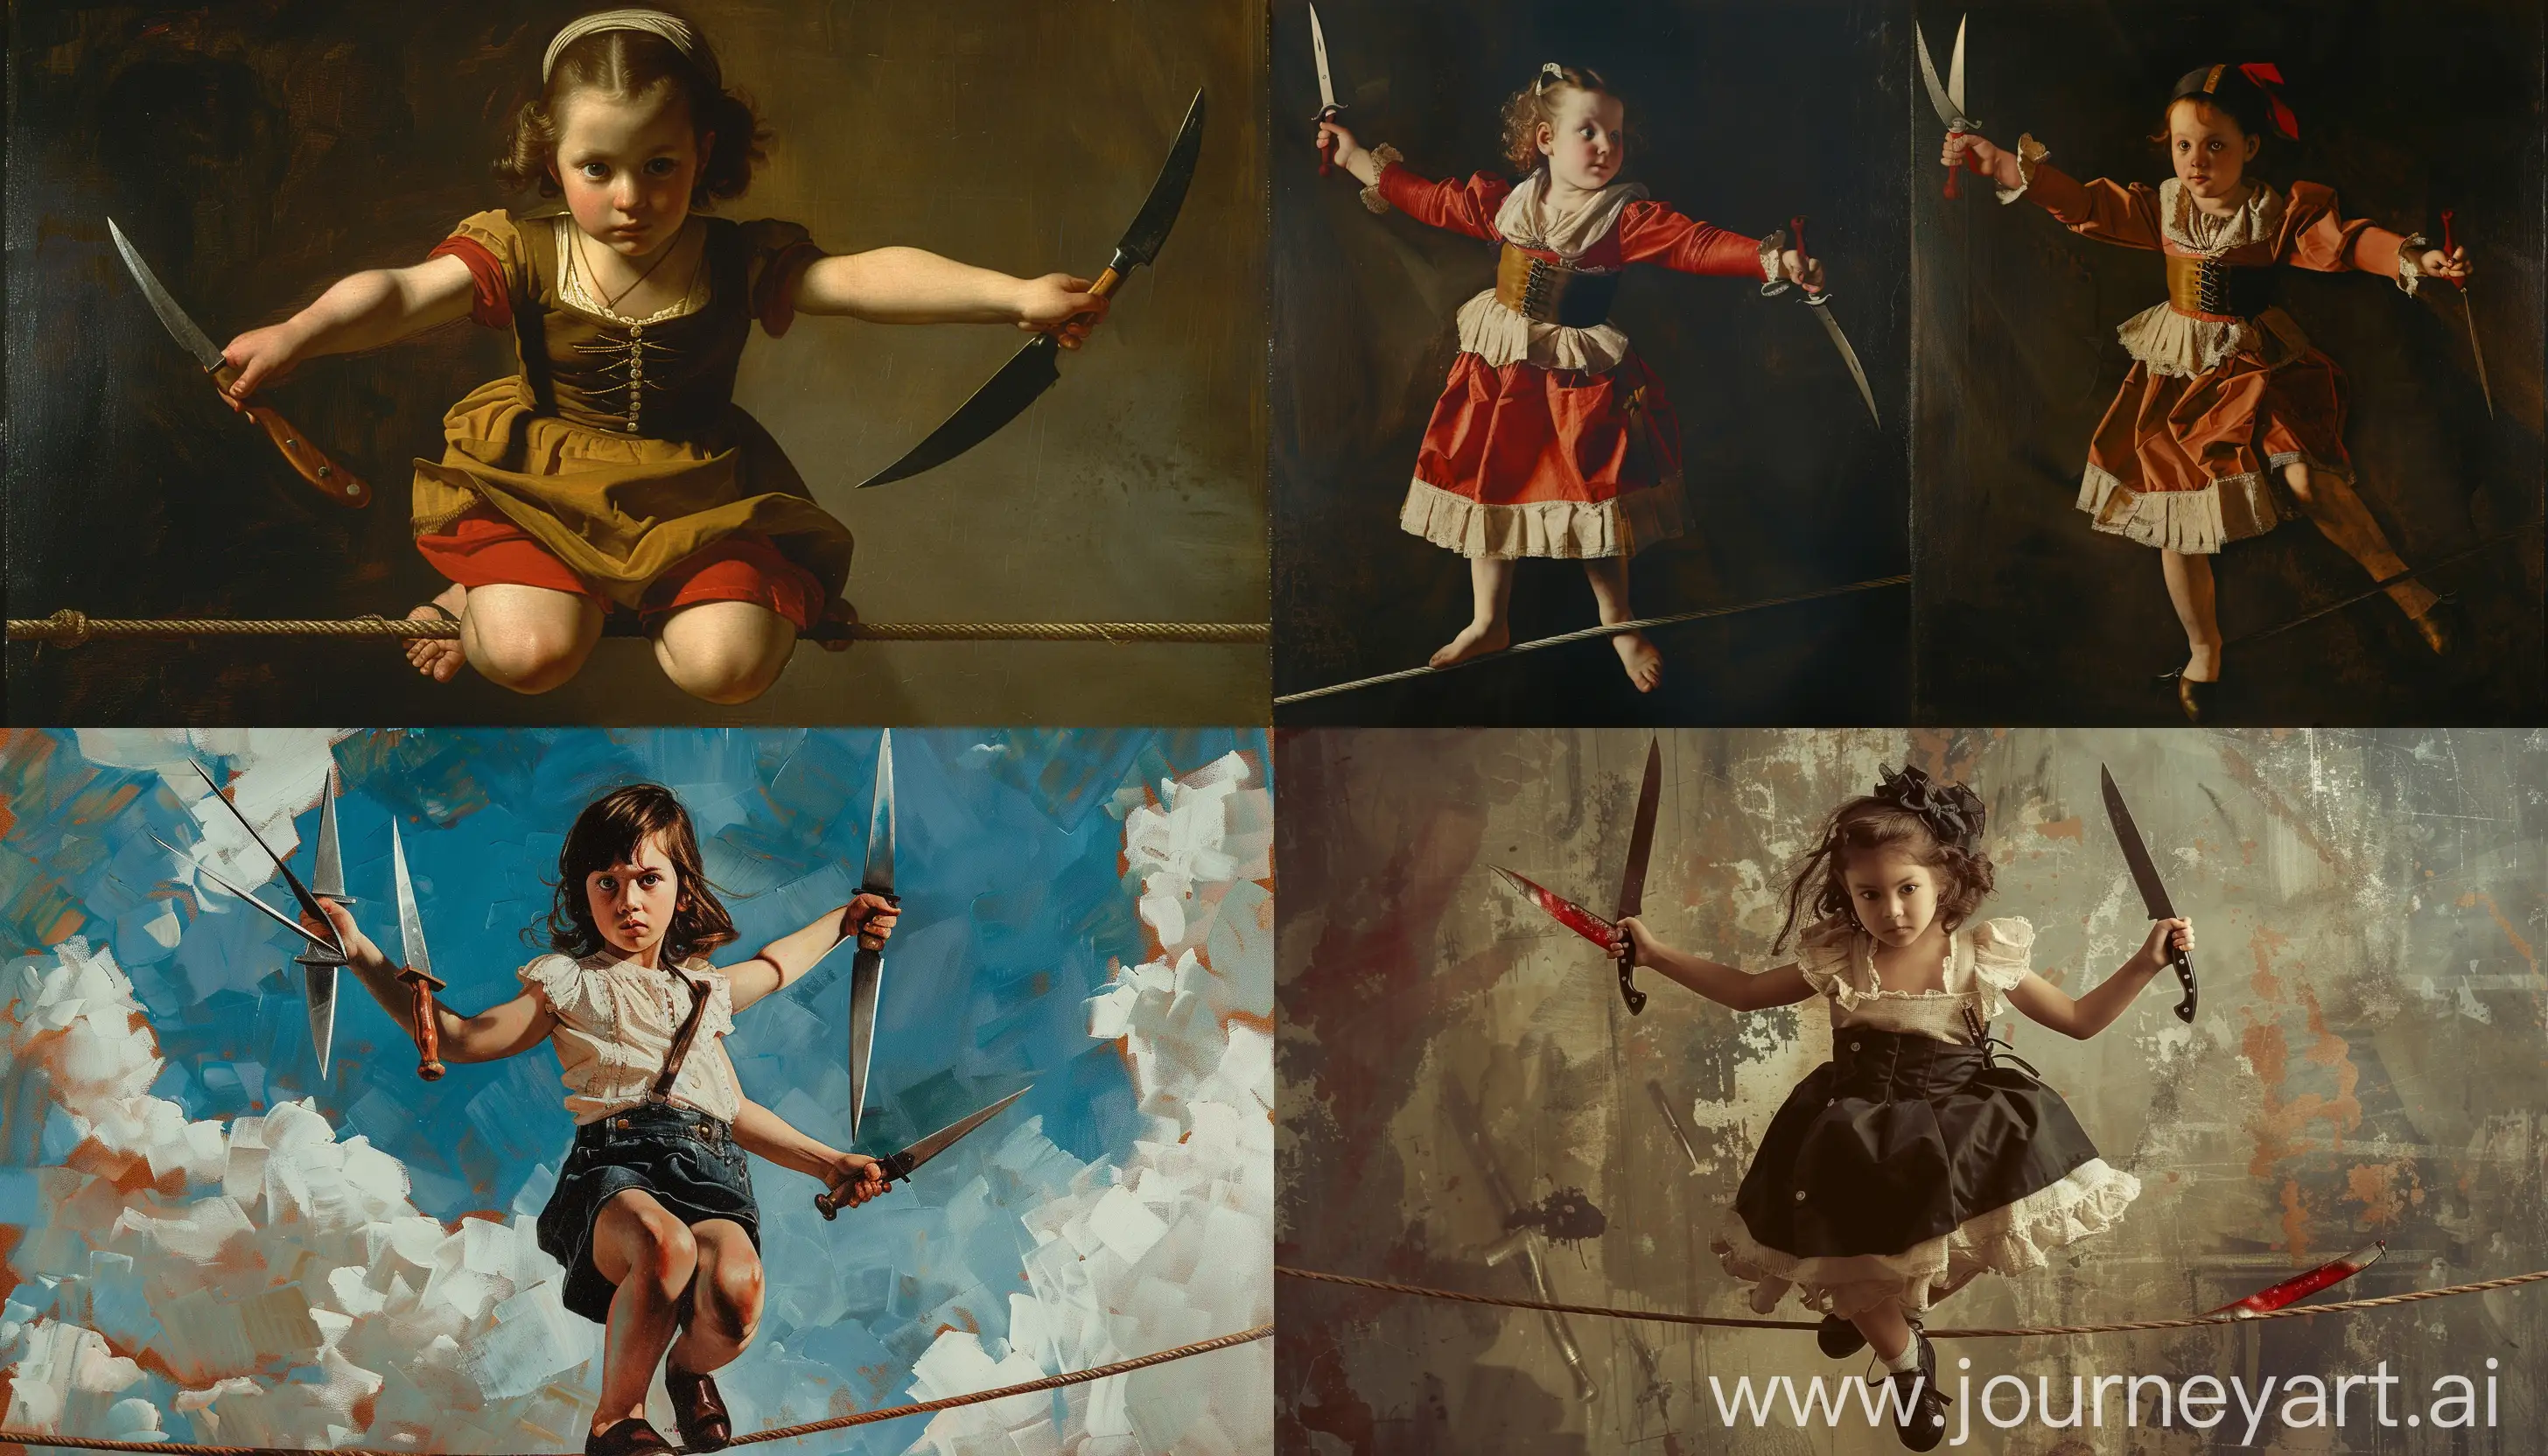 Brave-Girl-Balancing-on-Tightrope-with-Knives-Caravaggio-Style